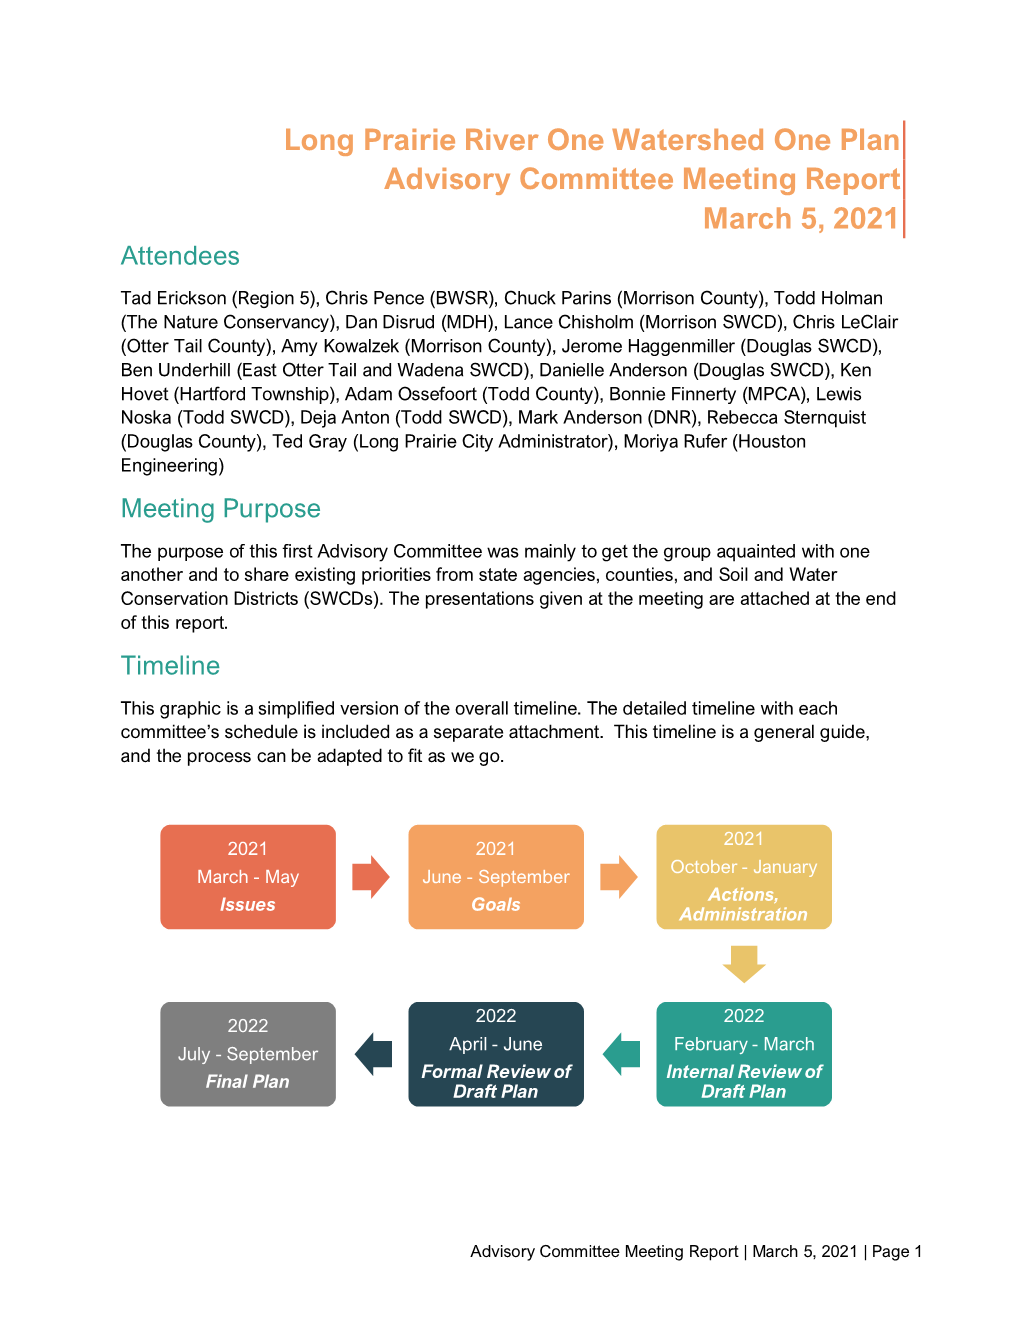 Long Prairie River One Watershed One Plan Advisory Committee Meeting Report March 5, 2021 Attendees